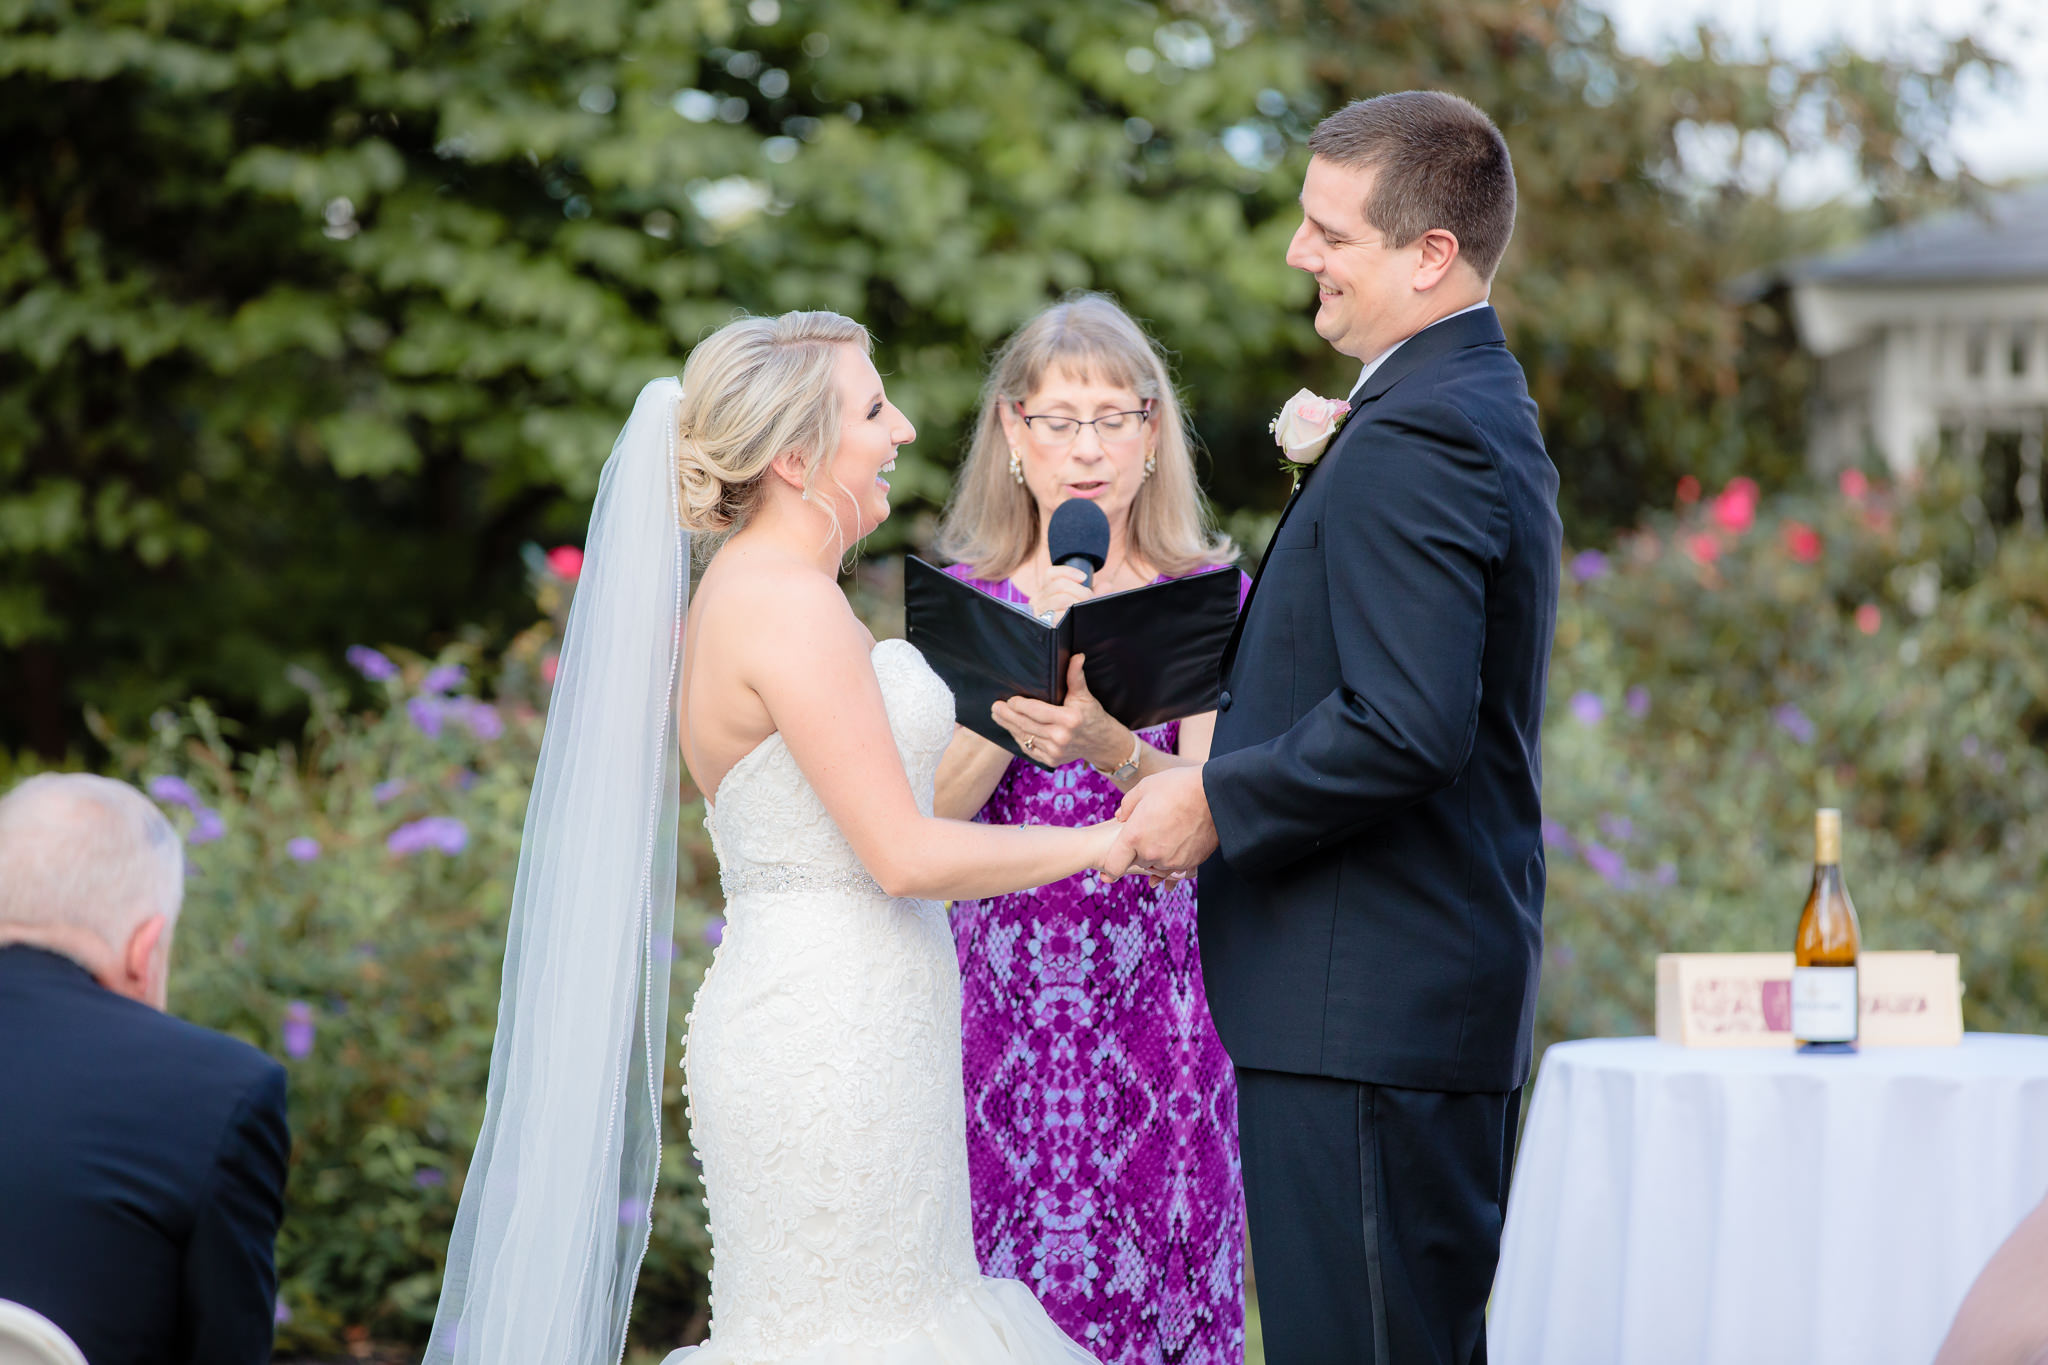 Bride & groom laugh together during their Greystone Fields wedding ceremony